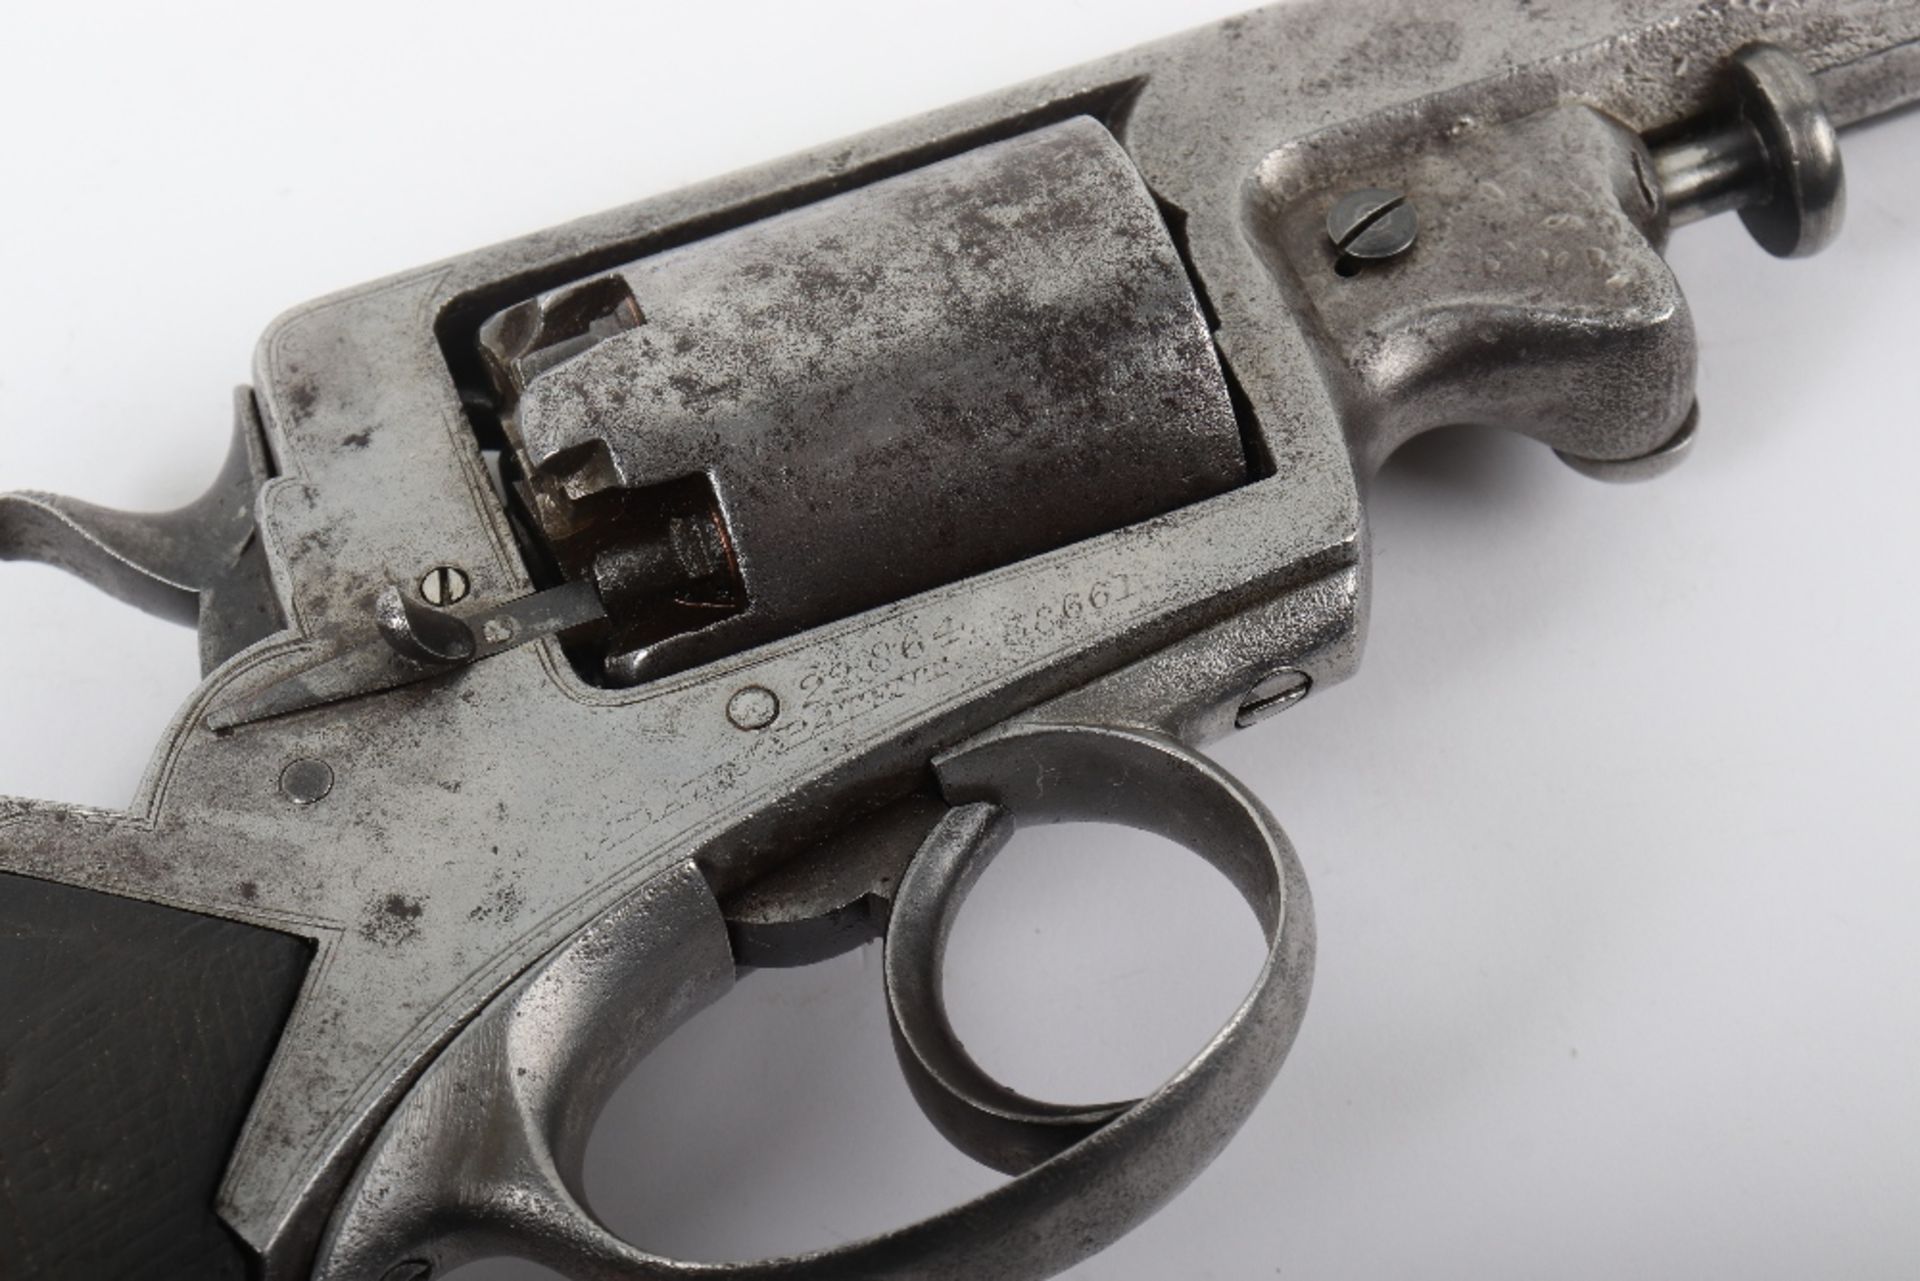 5 Shot 54-Bore Beaumont Adams Double Action Percussion Revolver with Connections to the Confederate - Image 3 of 8